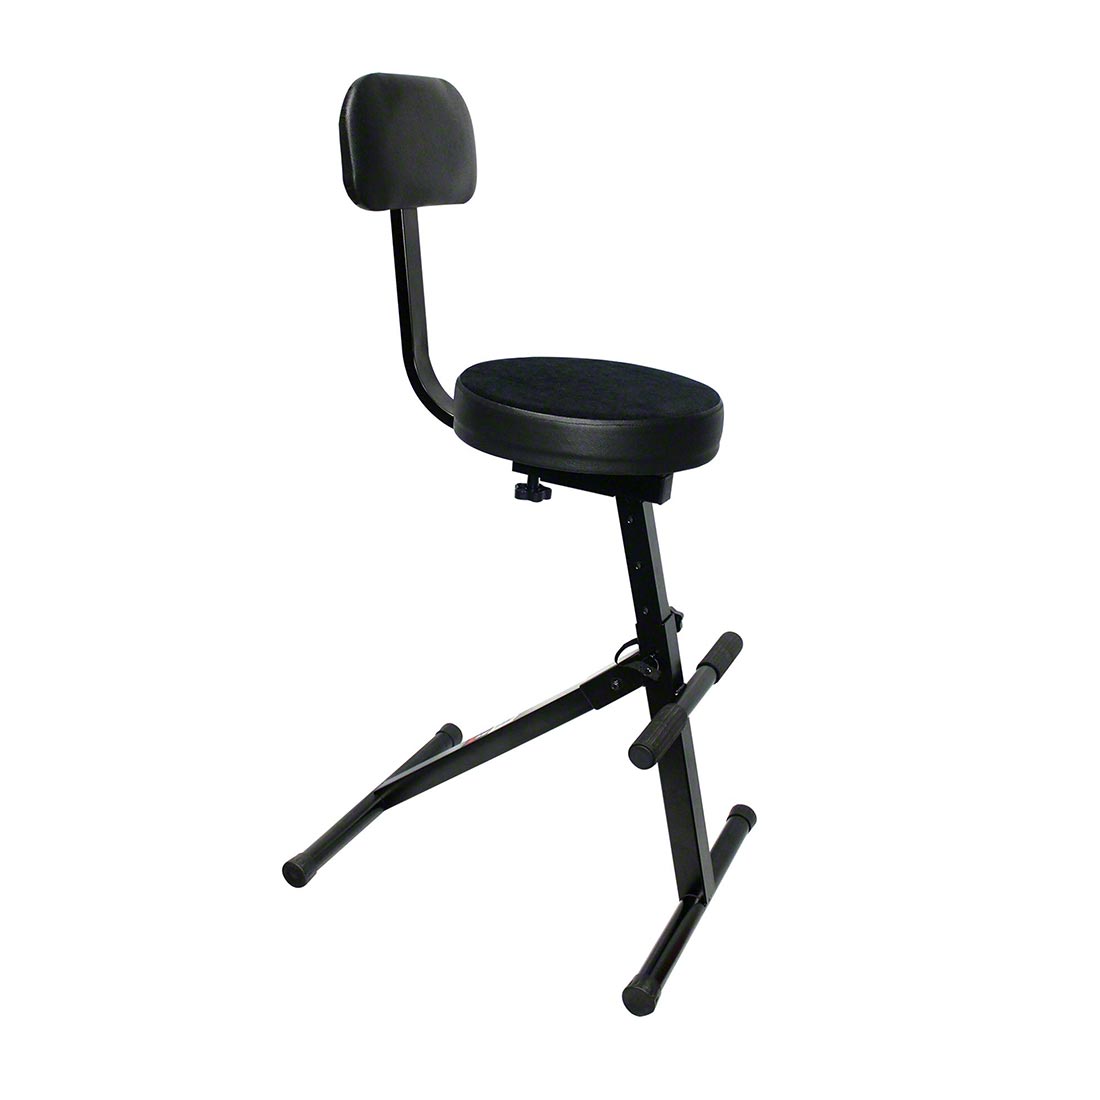 http://www.stagedrop.com/images/ProX%20Direct/prx-x-gig-chair.jpg